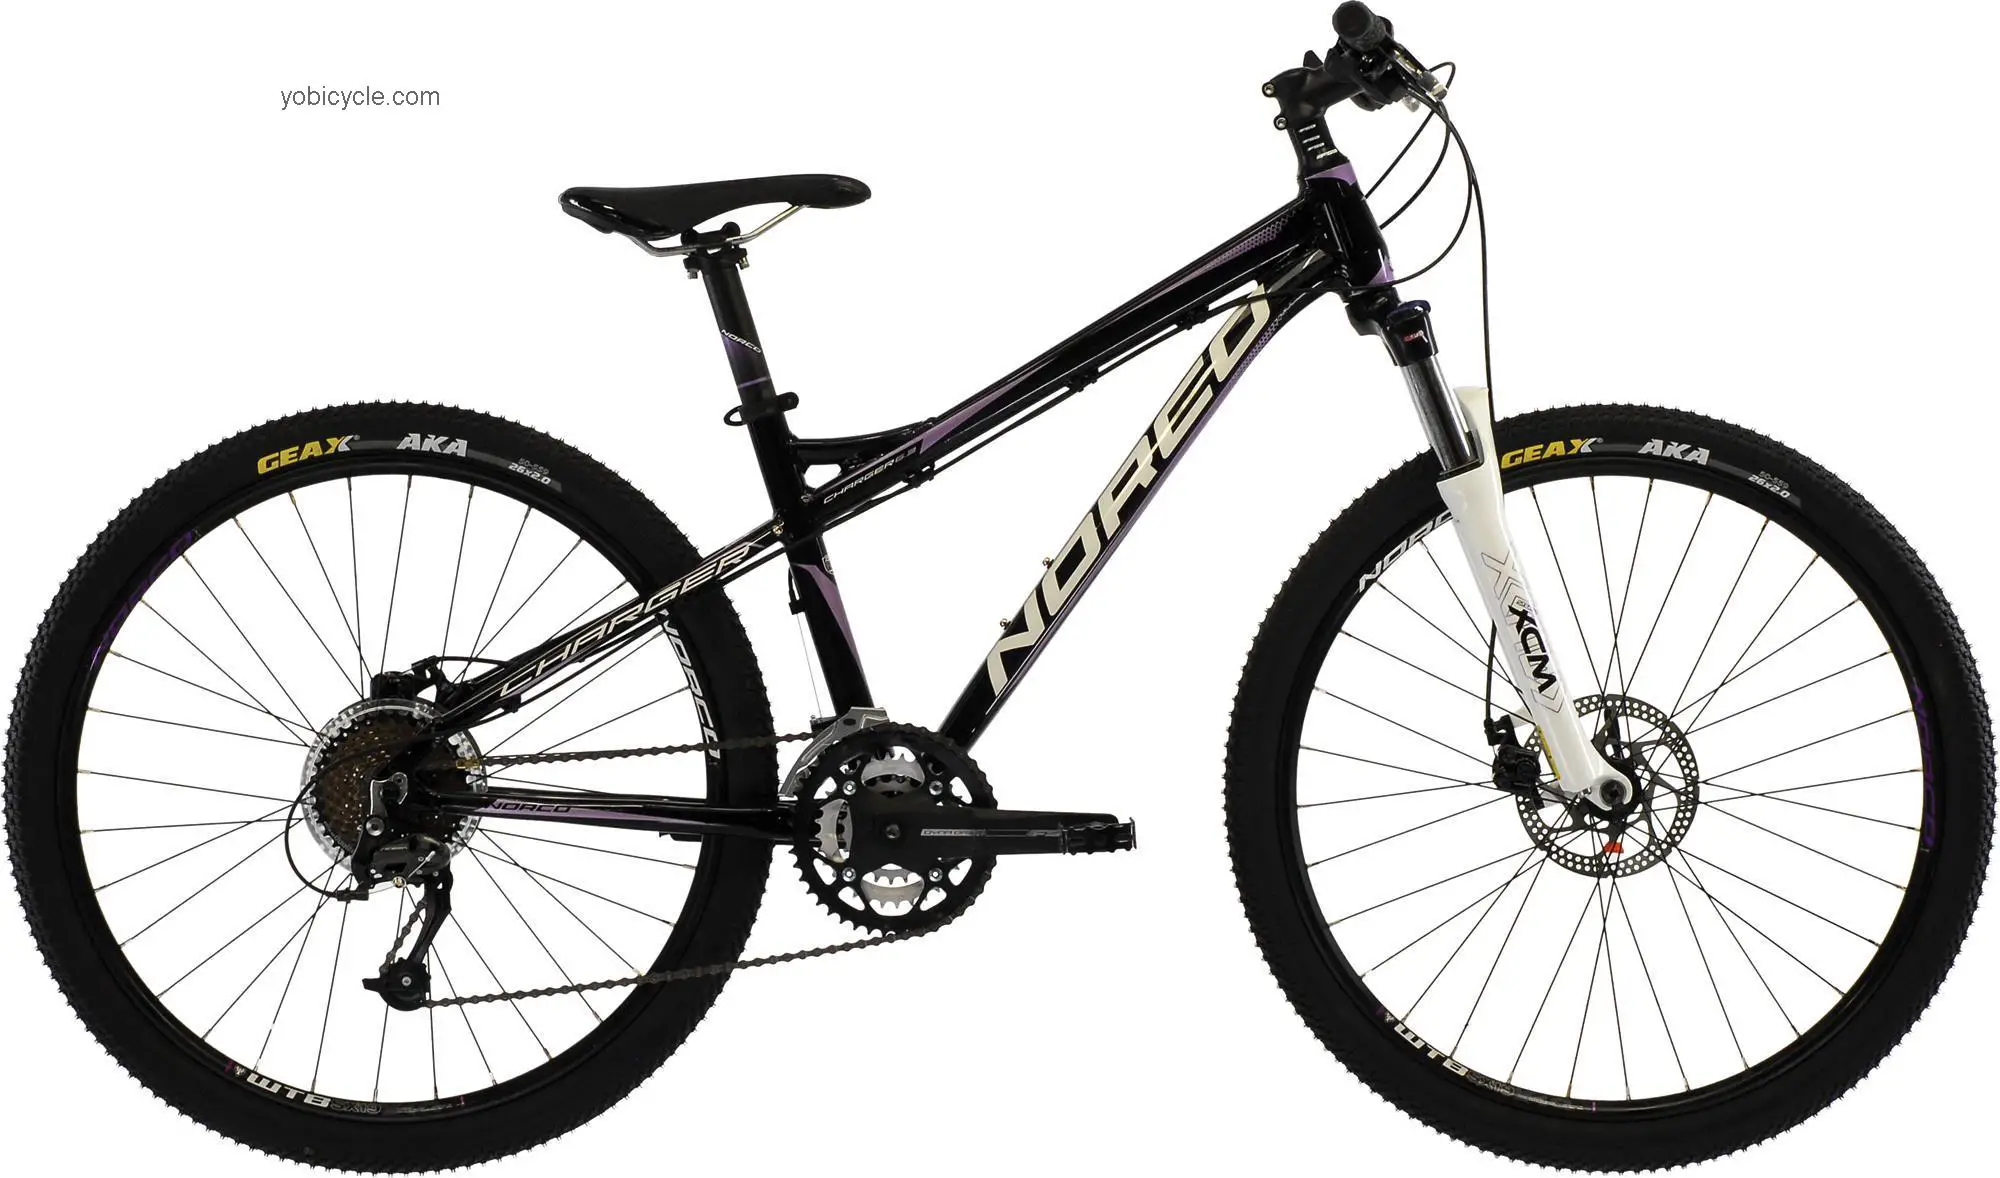 Norco Charger 6.3 Forma 2013 comparison online with competitors